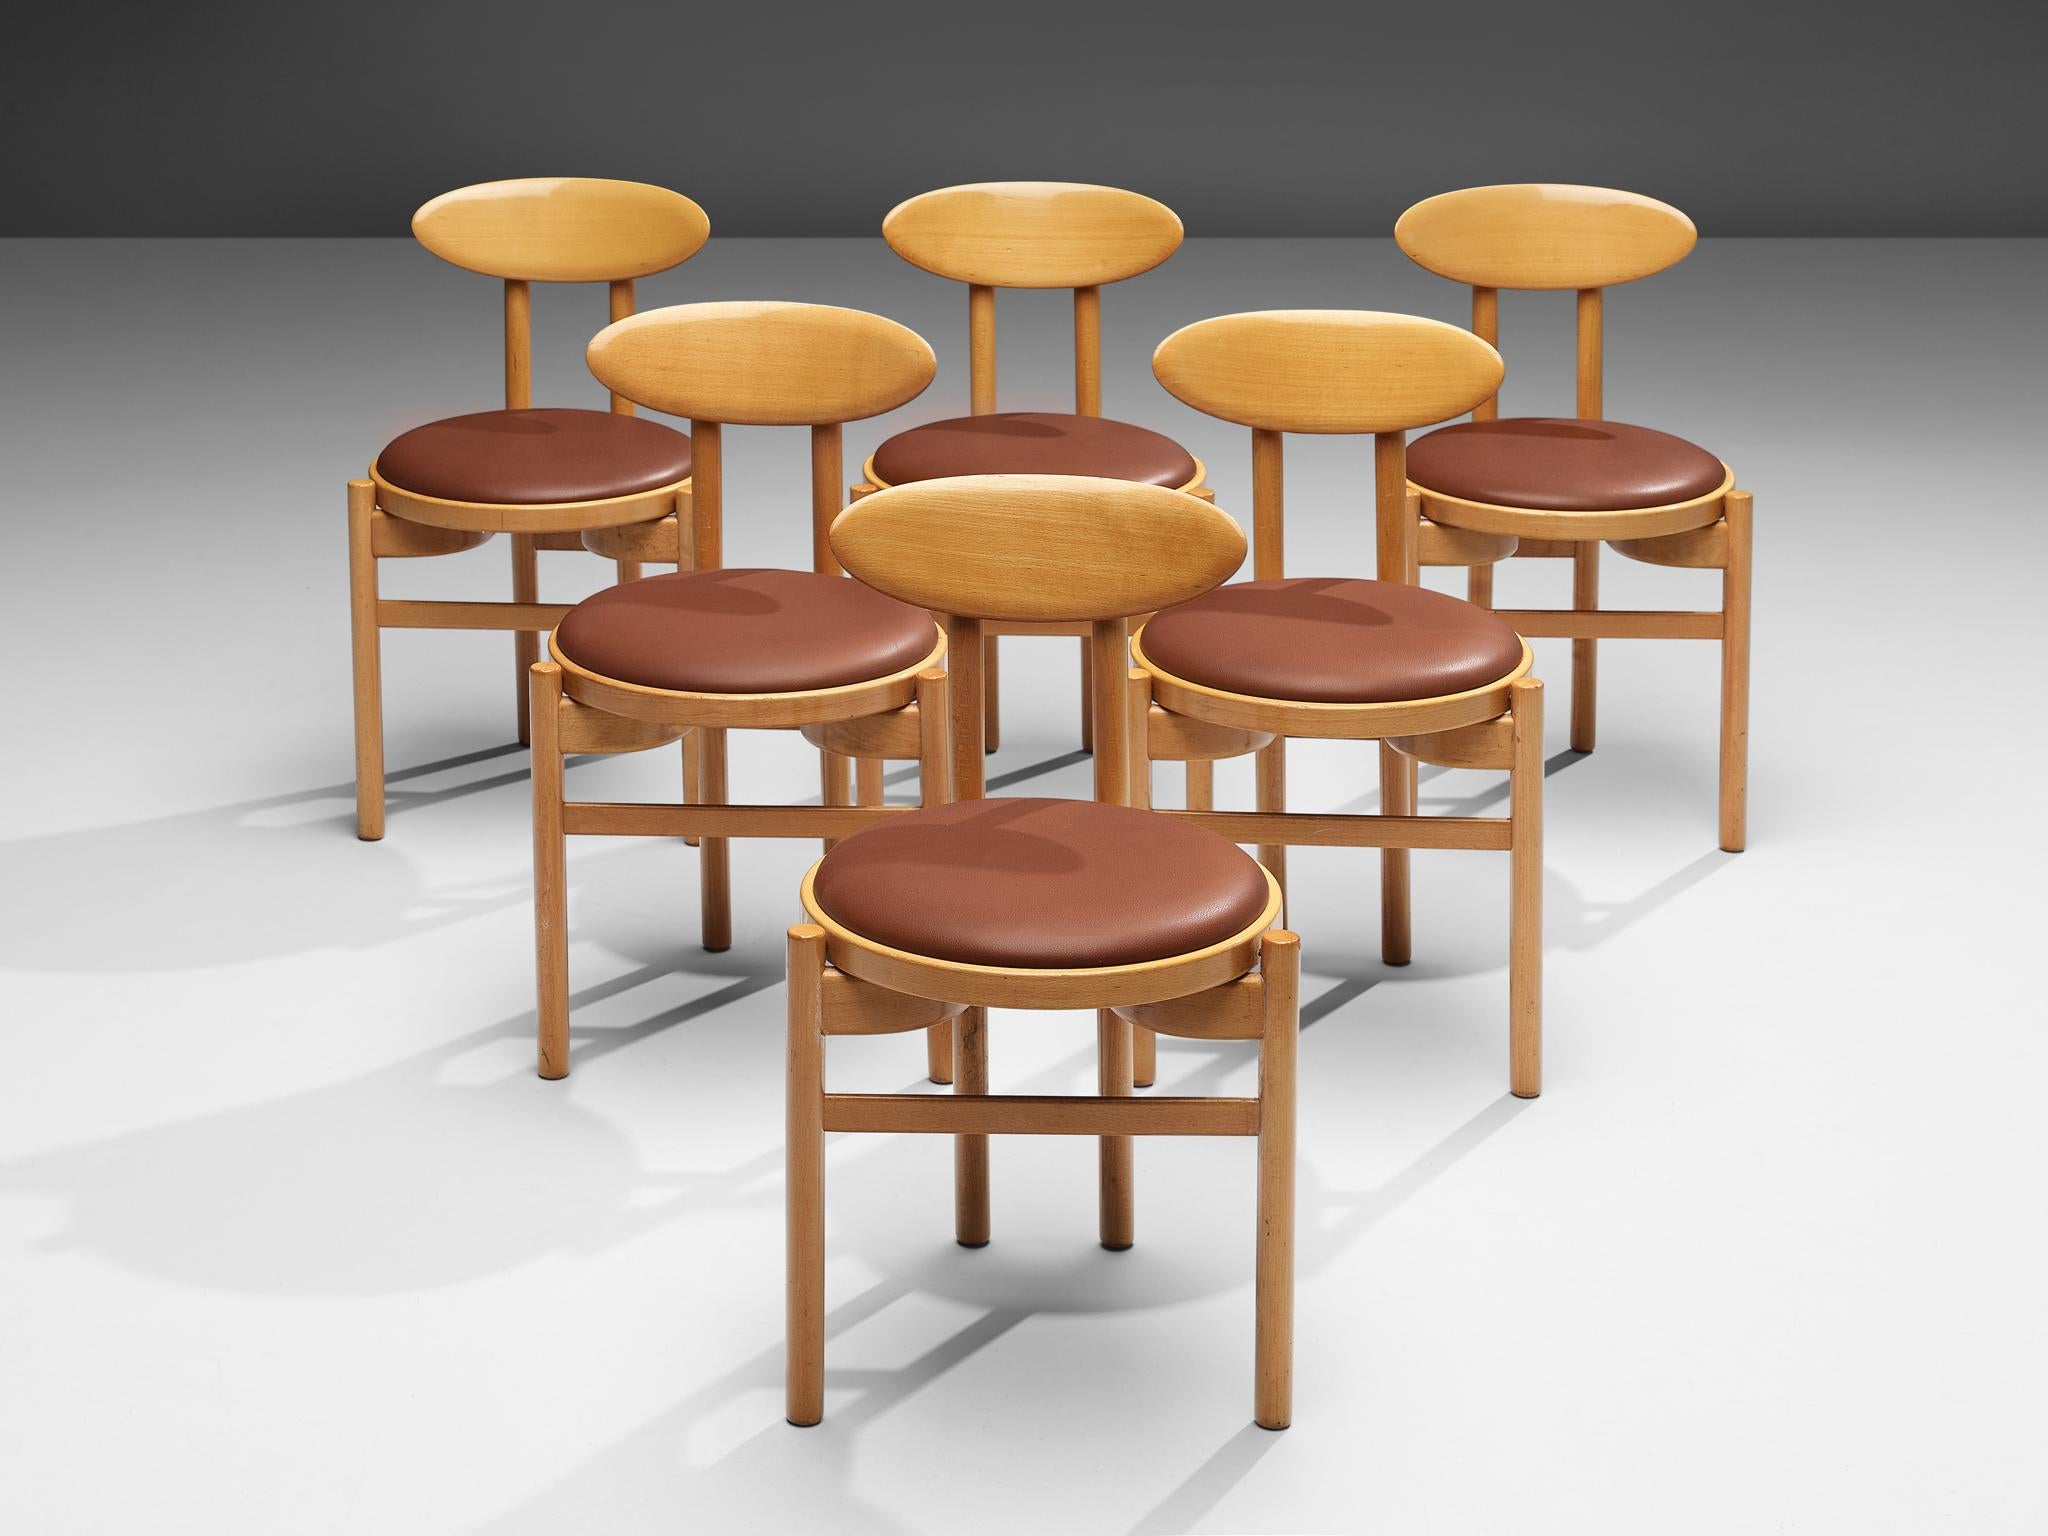 Pozzi, set of six dining chairs, stained beech, leatherette, Italy, 1970s

With their round seats and oval backrests these dining chairs by Italian manufacturer Pozzi have a dynamic, almost playful appearance. Two round legs in front and two paired